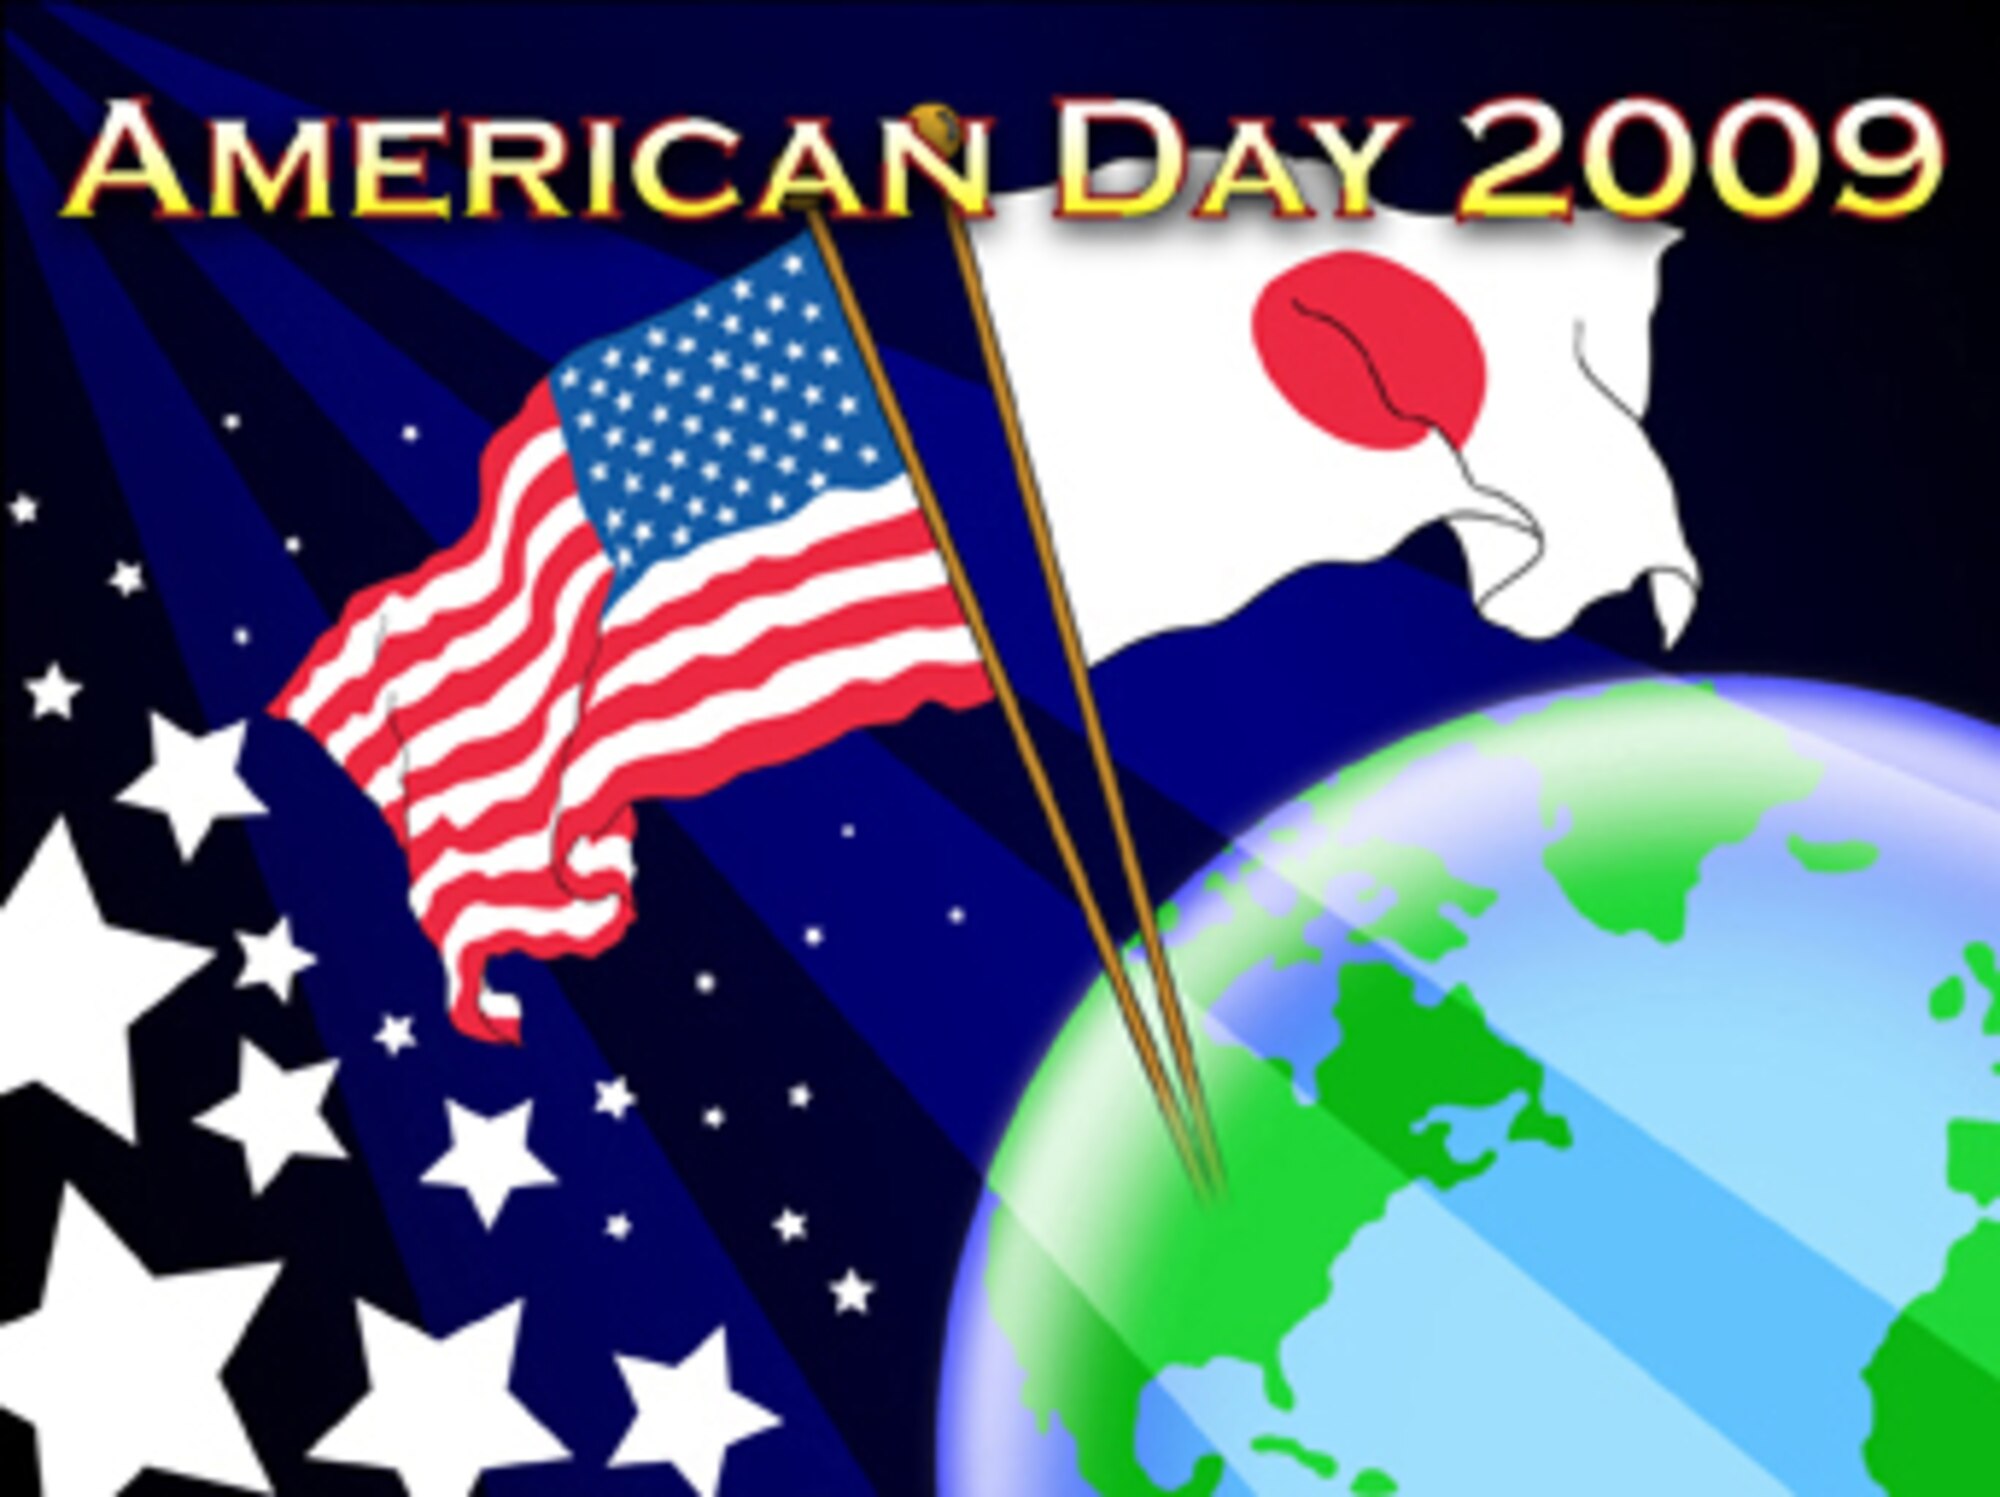 American Day scheduled for June 6-7